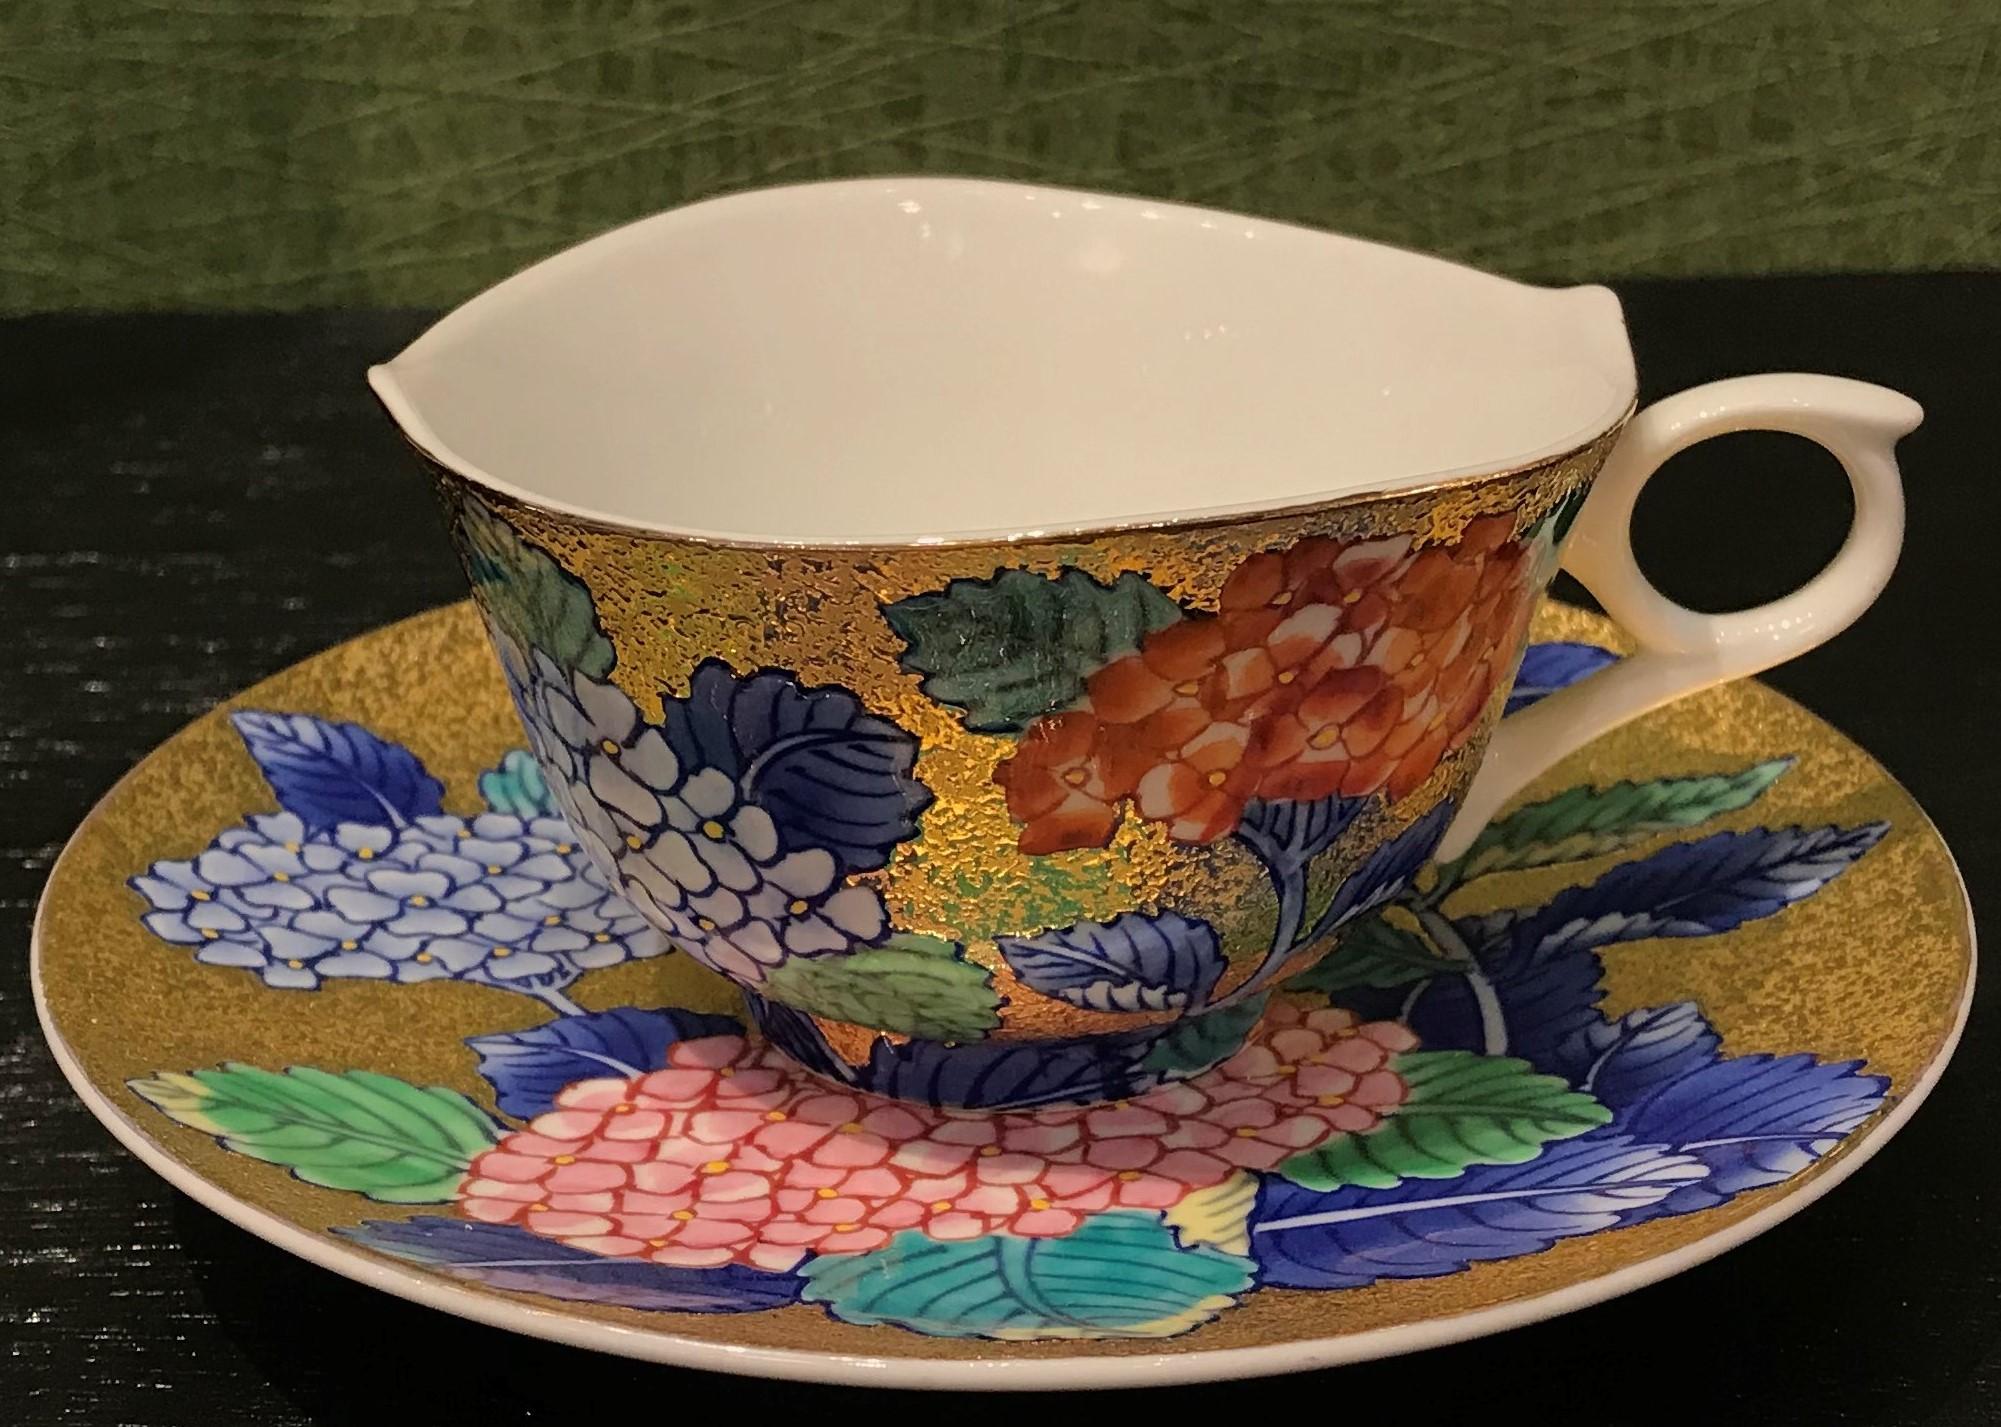 Exquisite contemporary gilded fine porcelain cup and saucer, intricately hand painted in vivid blue, red and pink on an attractive gilded body, featuring stunning hydrangeas in full bloom. This cup and saucer is from a signature series by a highly